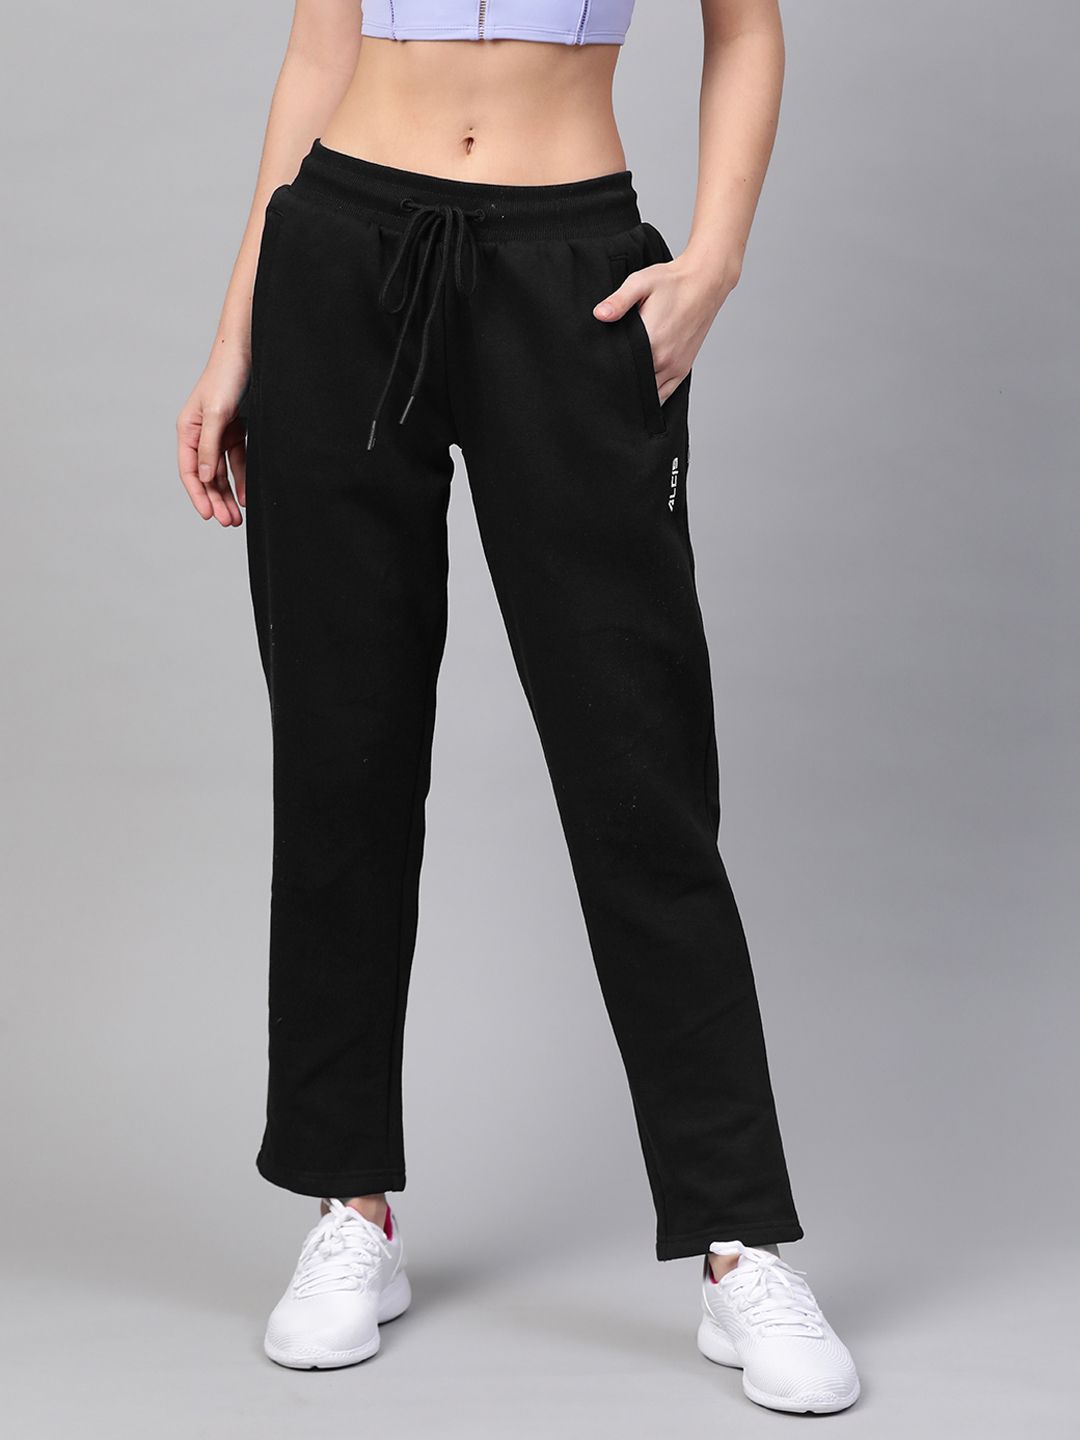 Alcis Women Black Solid Track Pants Price in India